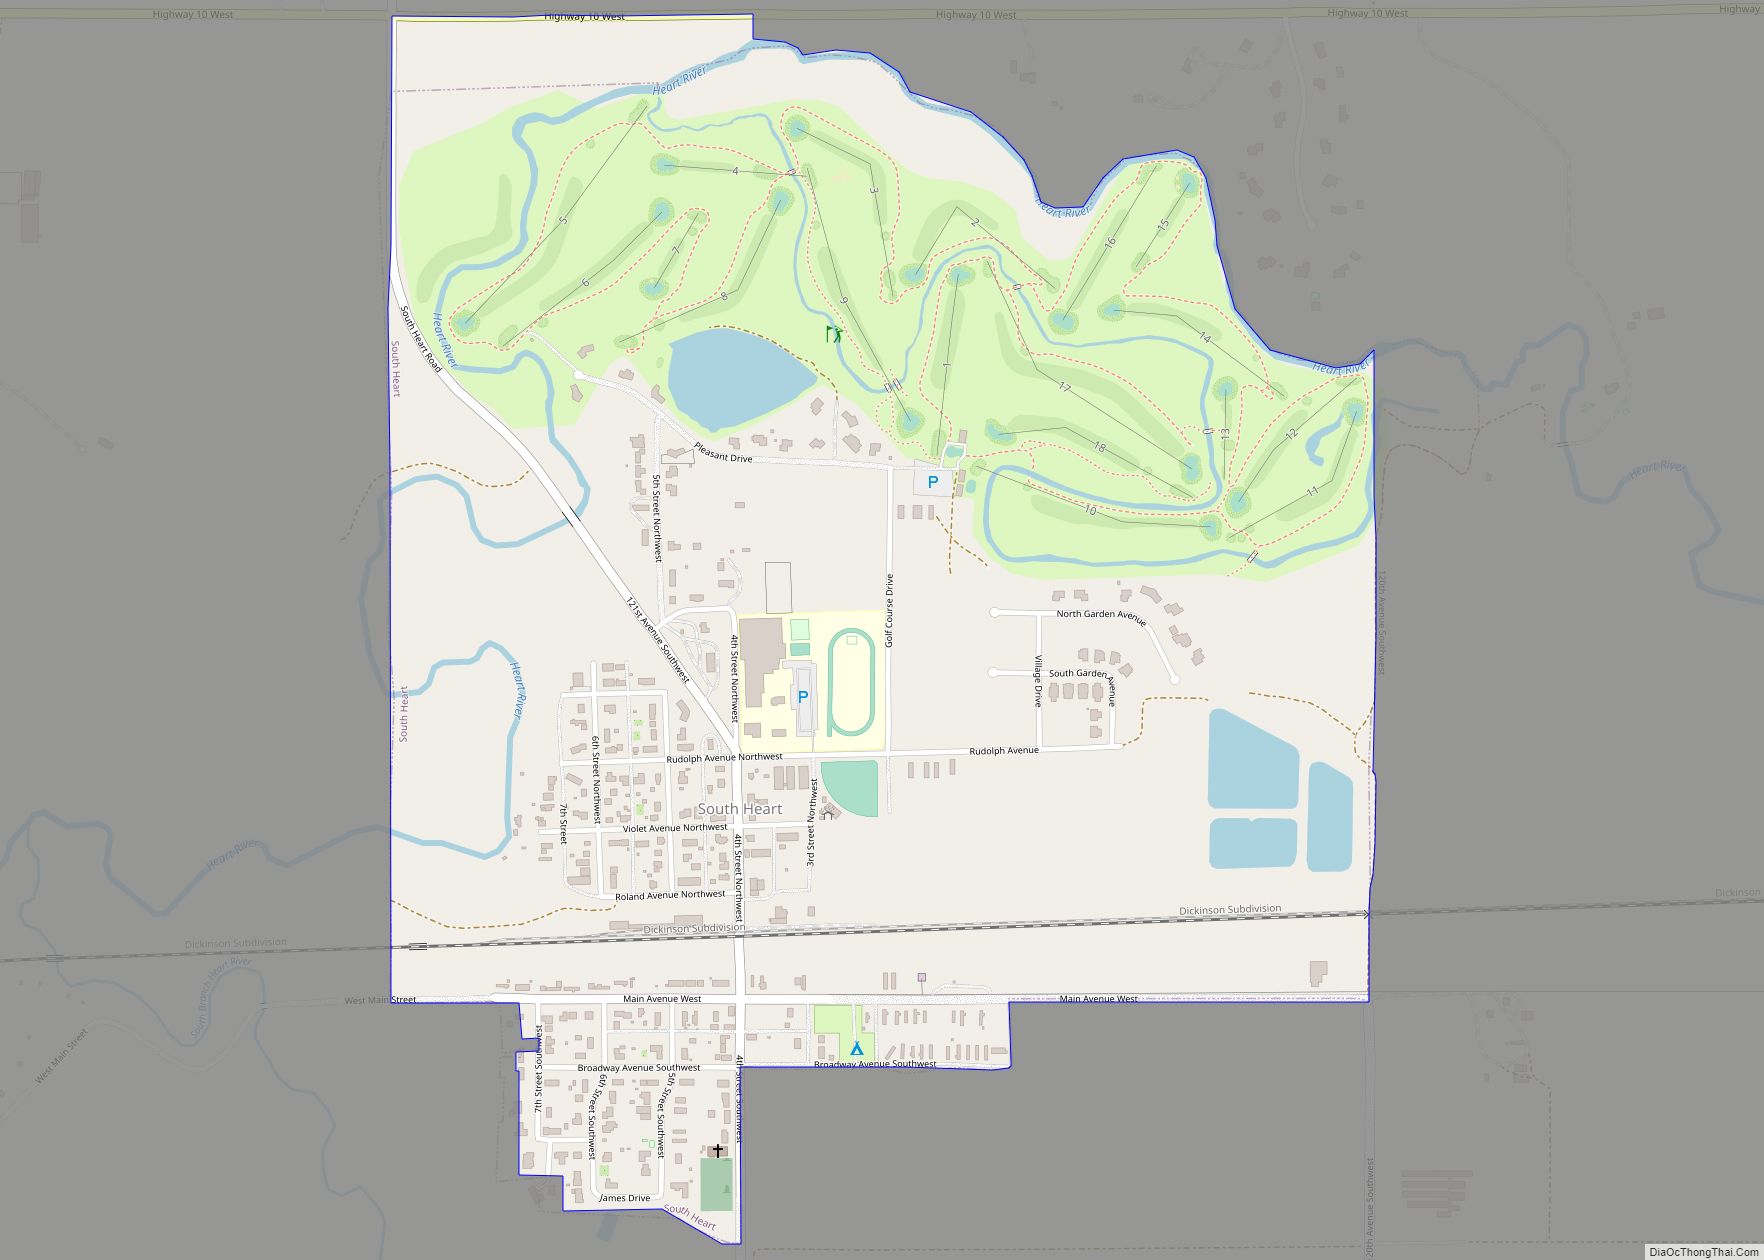 Map of South Heart city